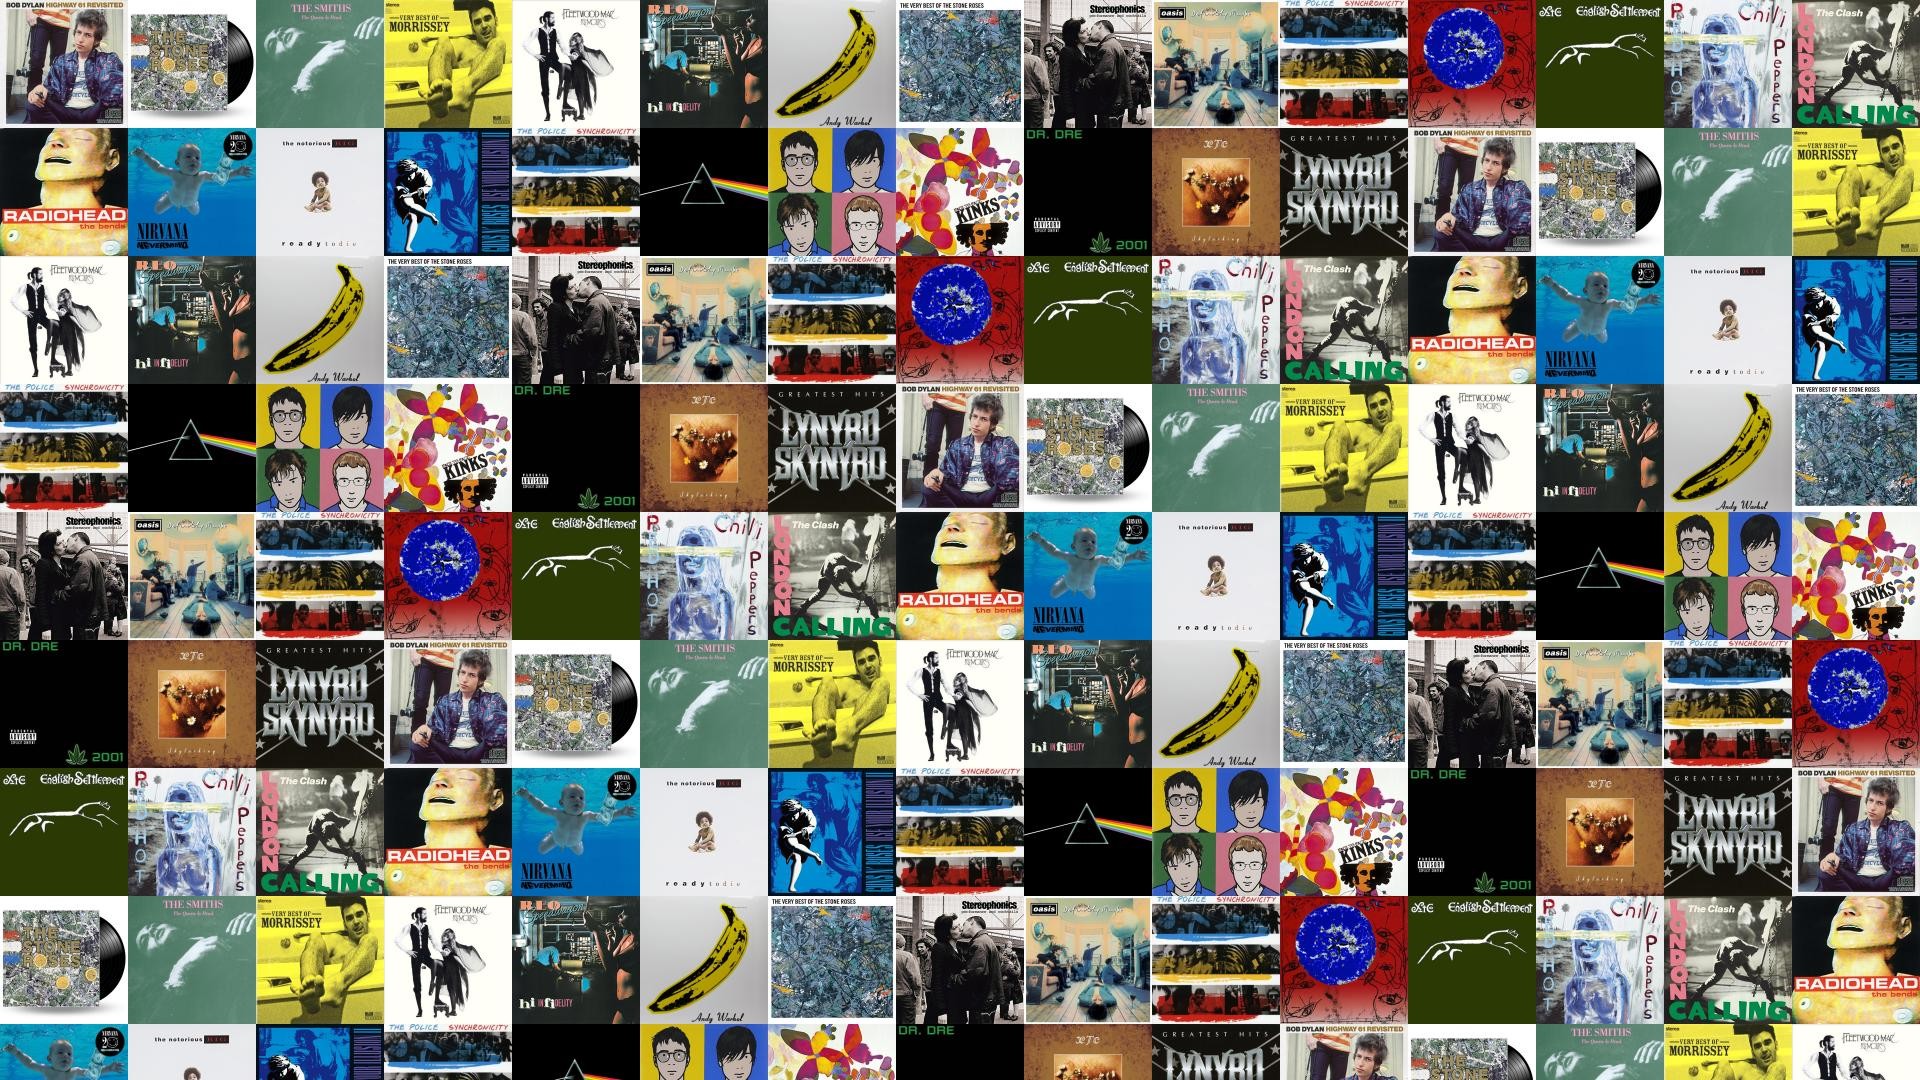 1920x1080 Download this free wallpaper with images of Stone Roses – Title, Stone  Roses – Stone Roses, The Smiths – Queen Is Dead, Morrissey – The Best Of,  Fleetwood ...